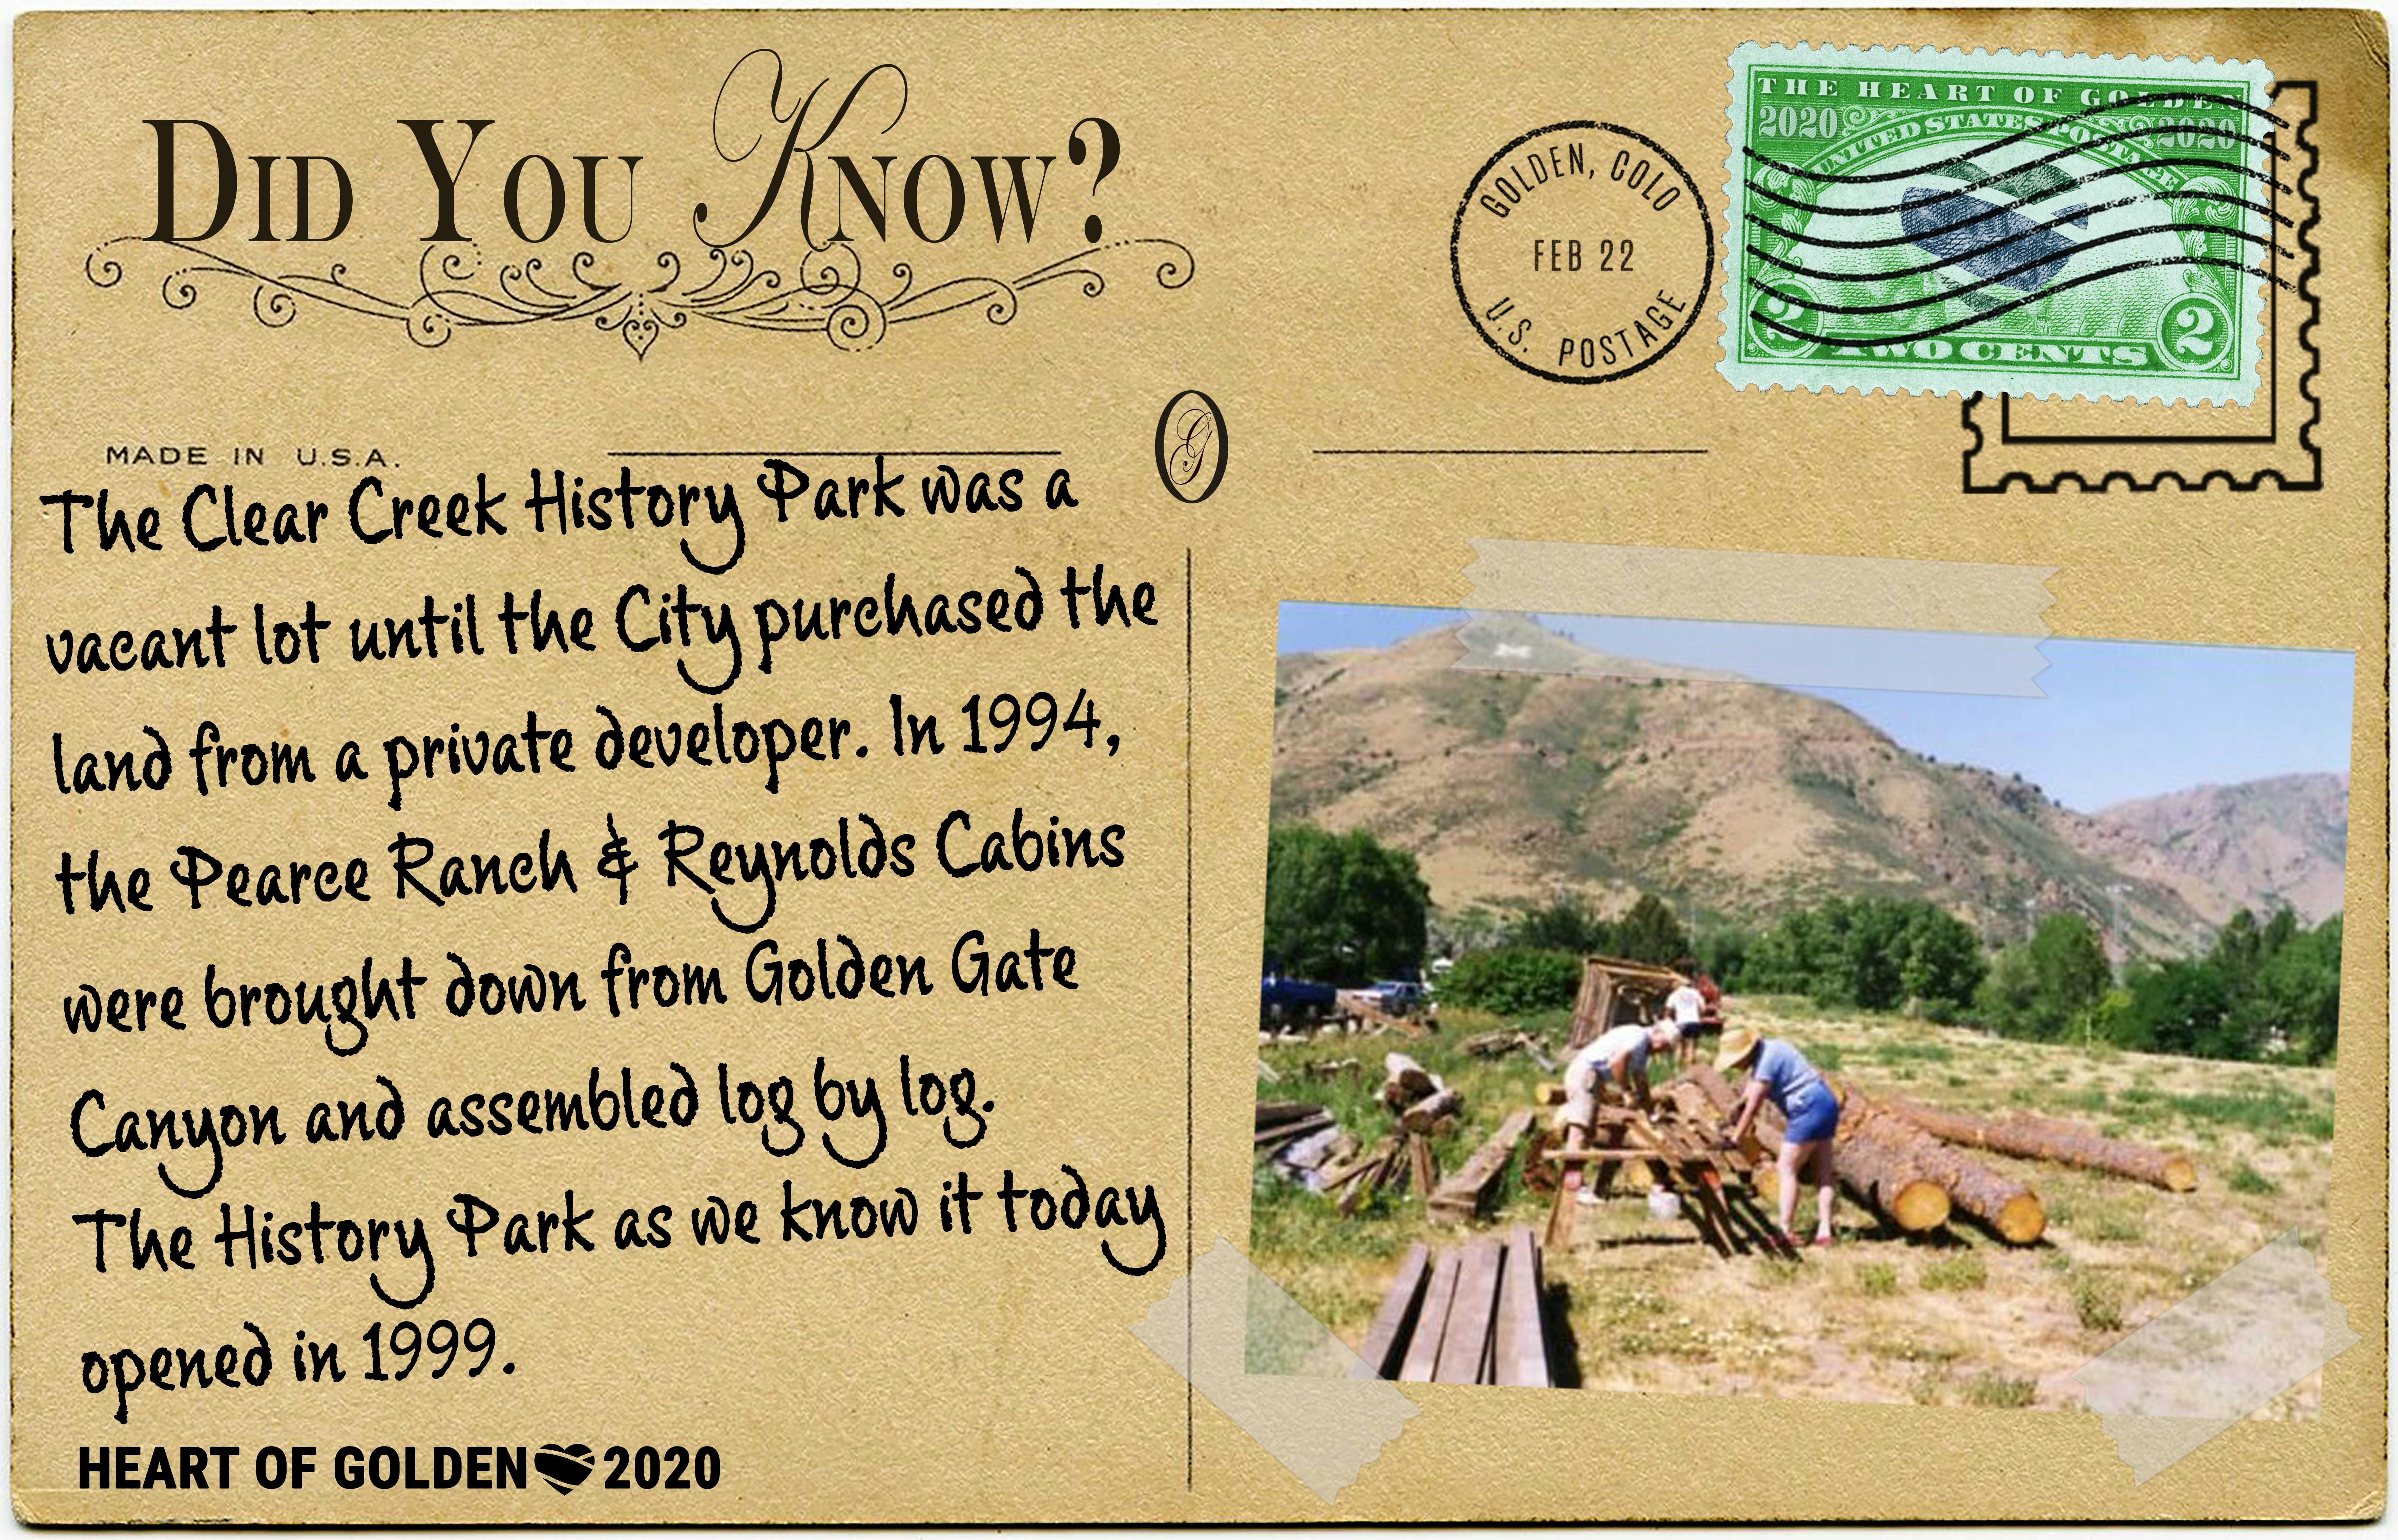 The Golden History Park was a vacant lot until the City purchased it in the early 90's!